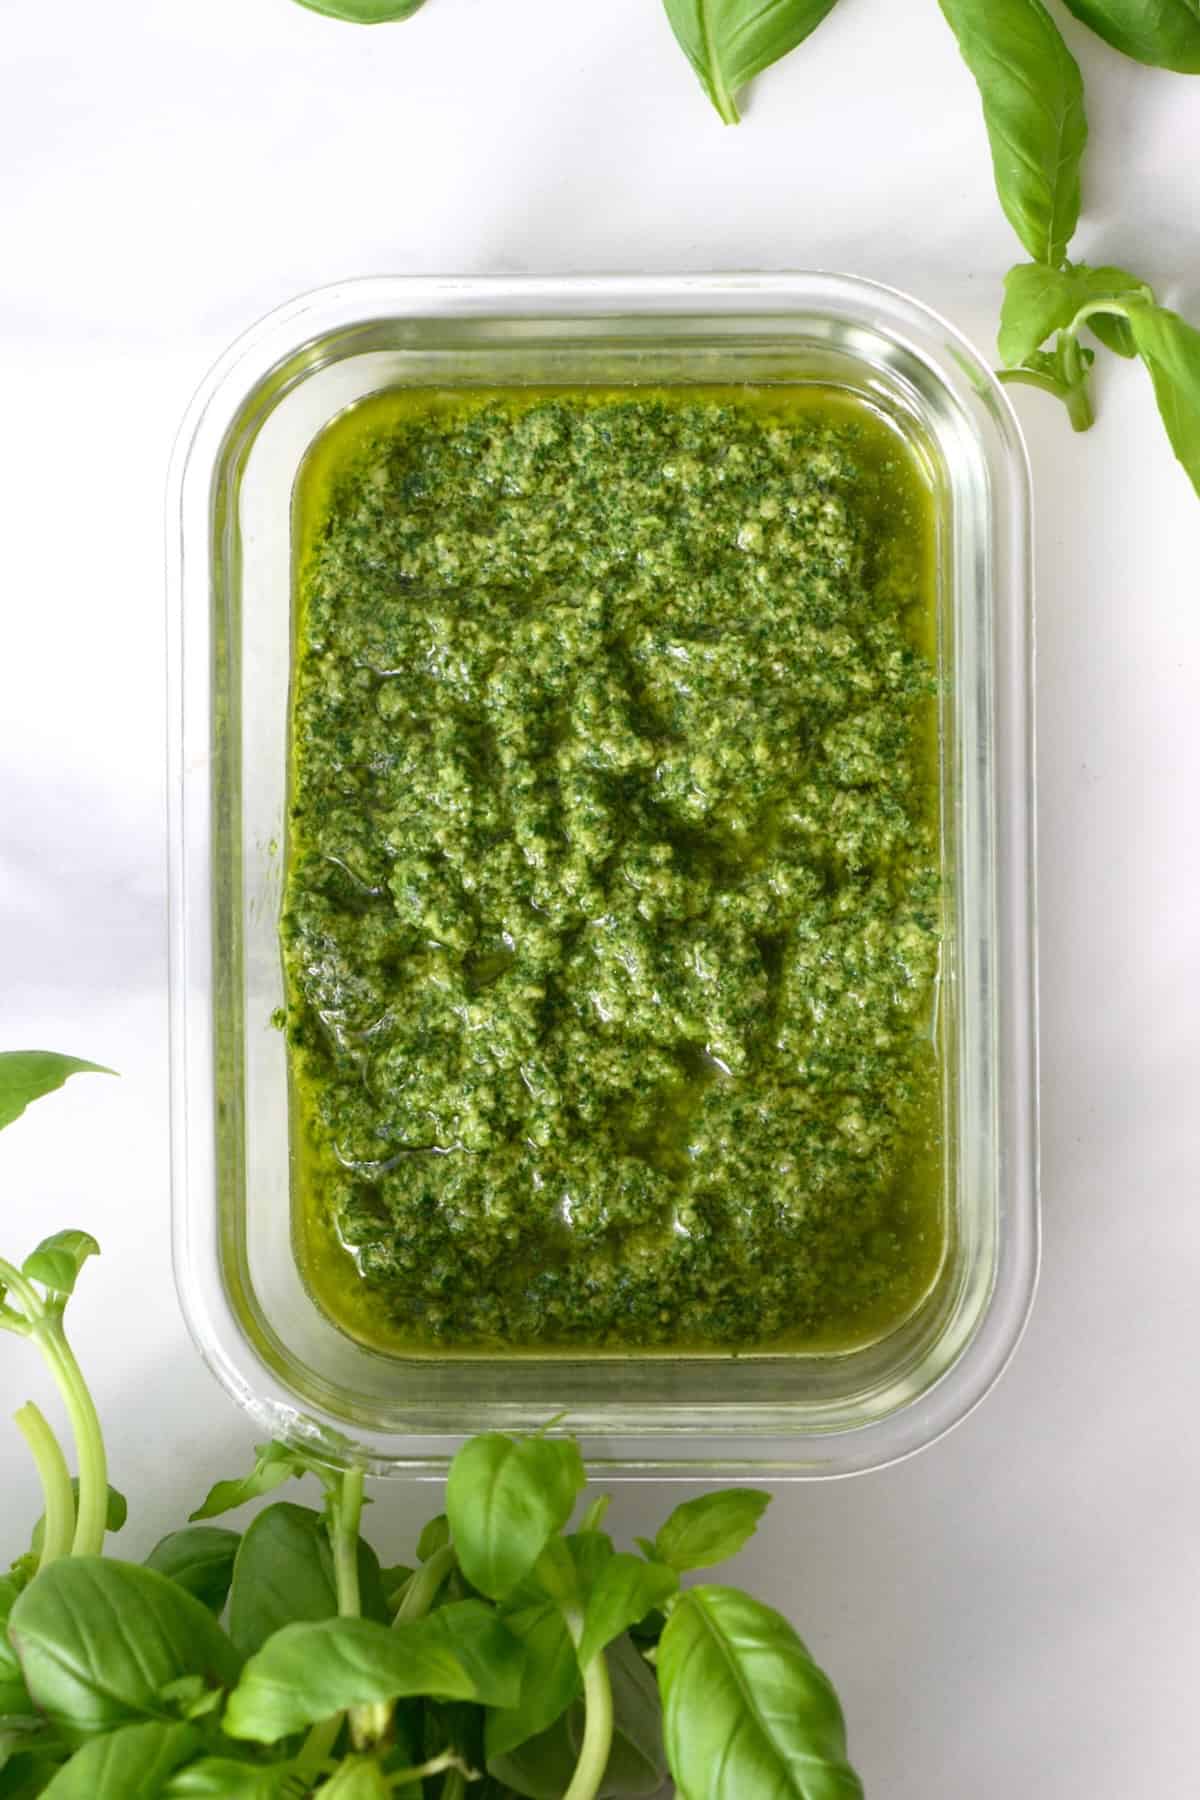 Top view of a container with vegan basil pesto